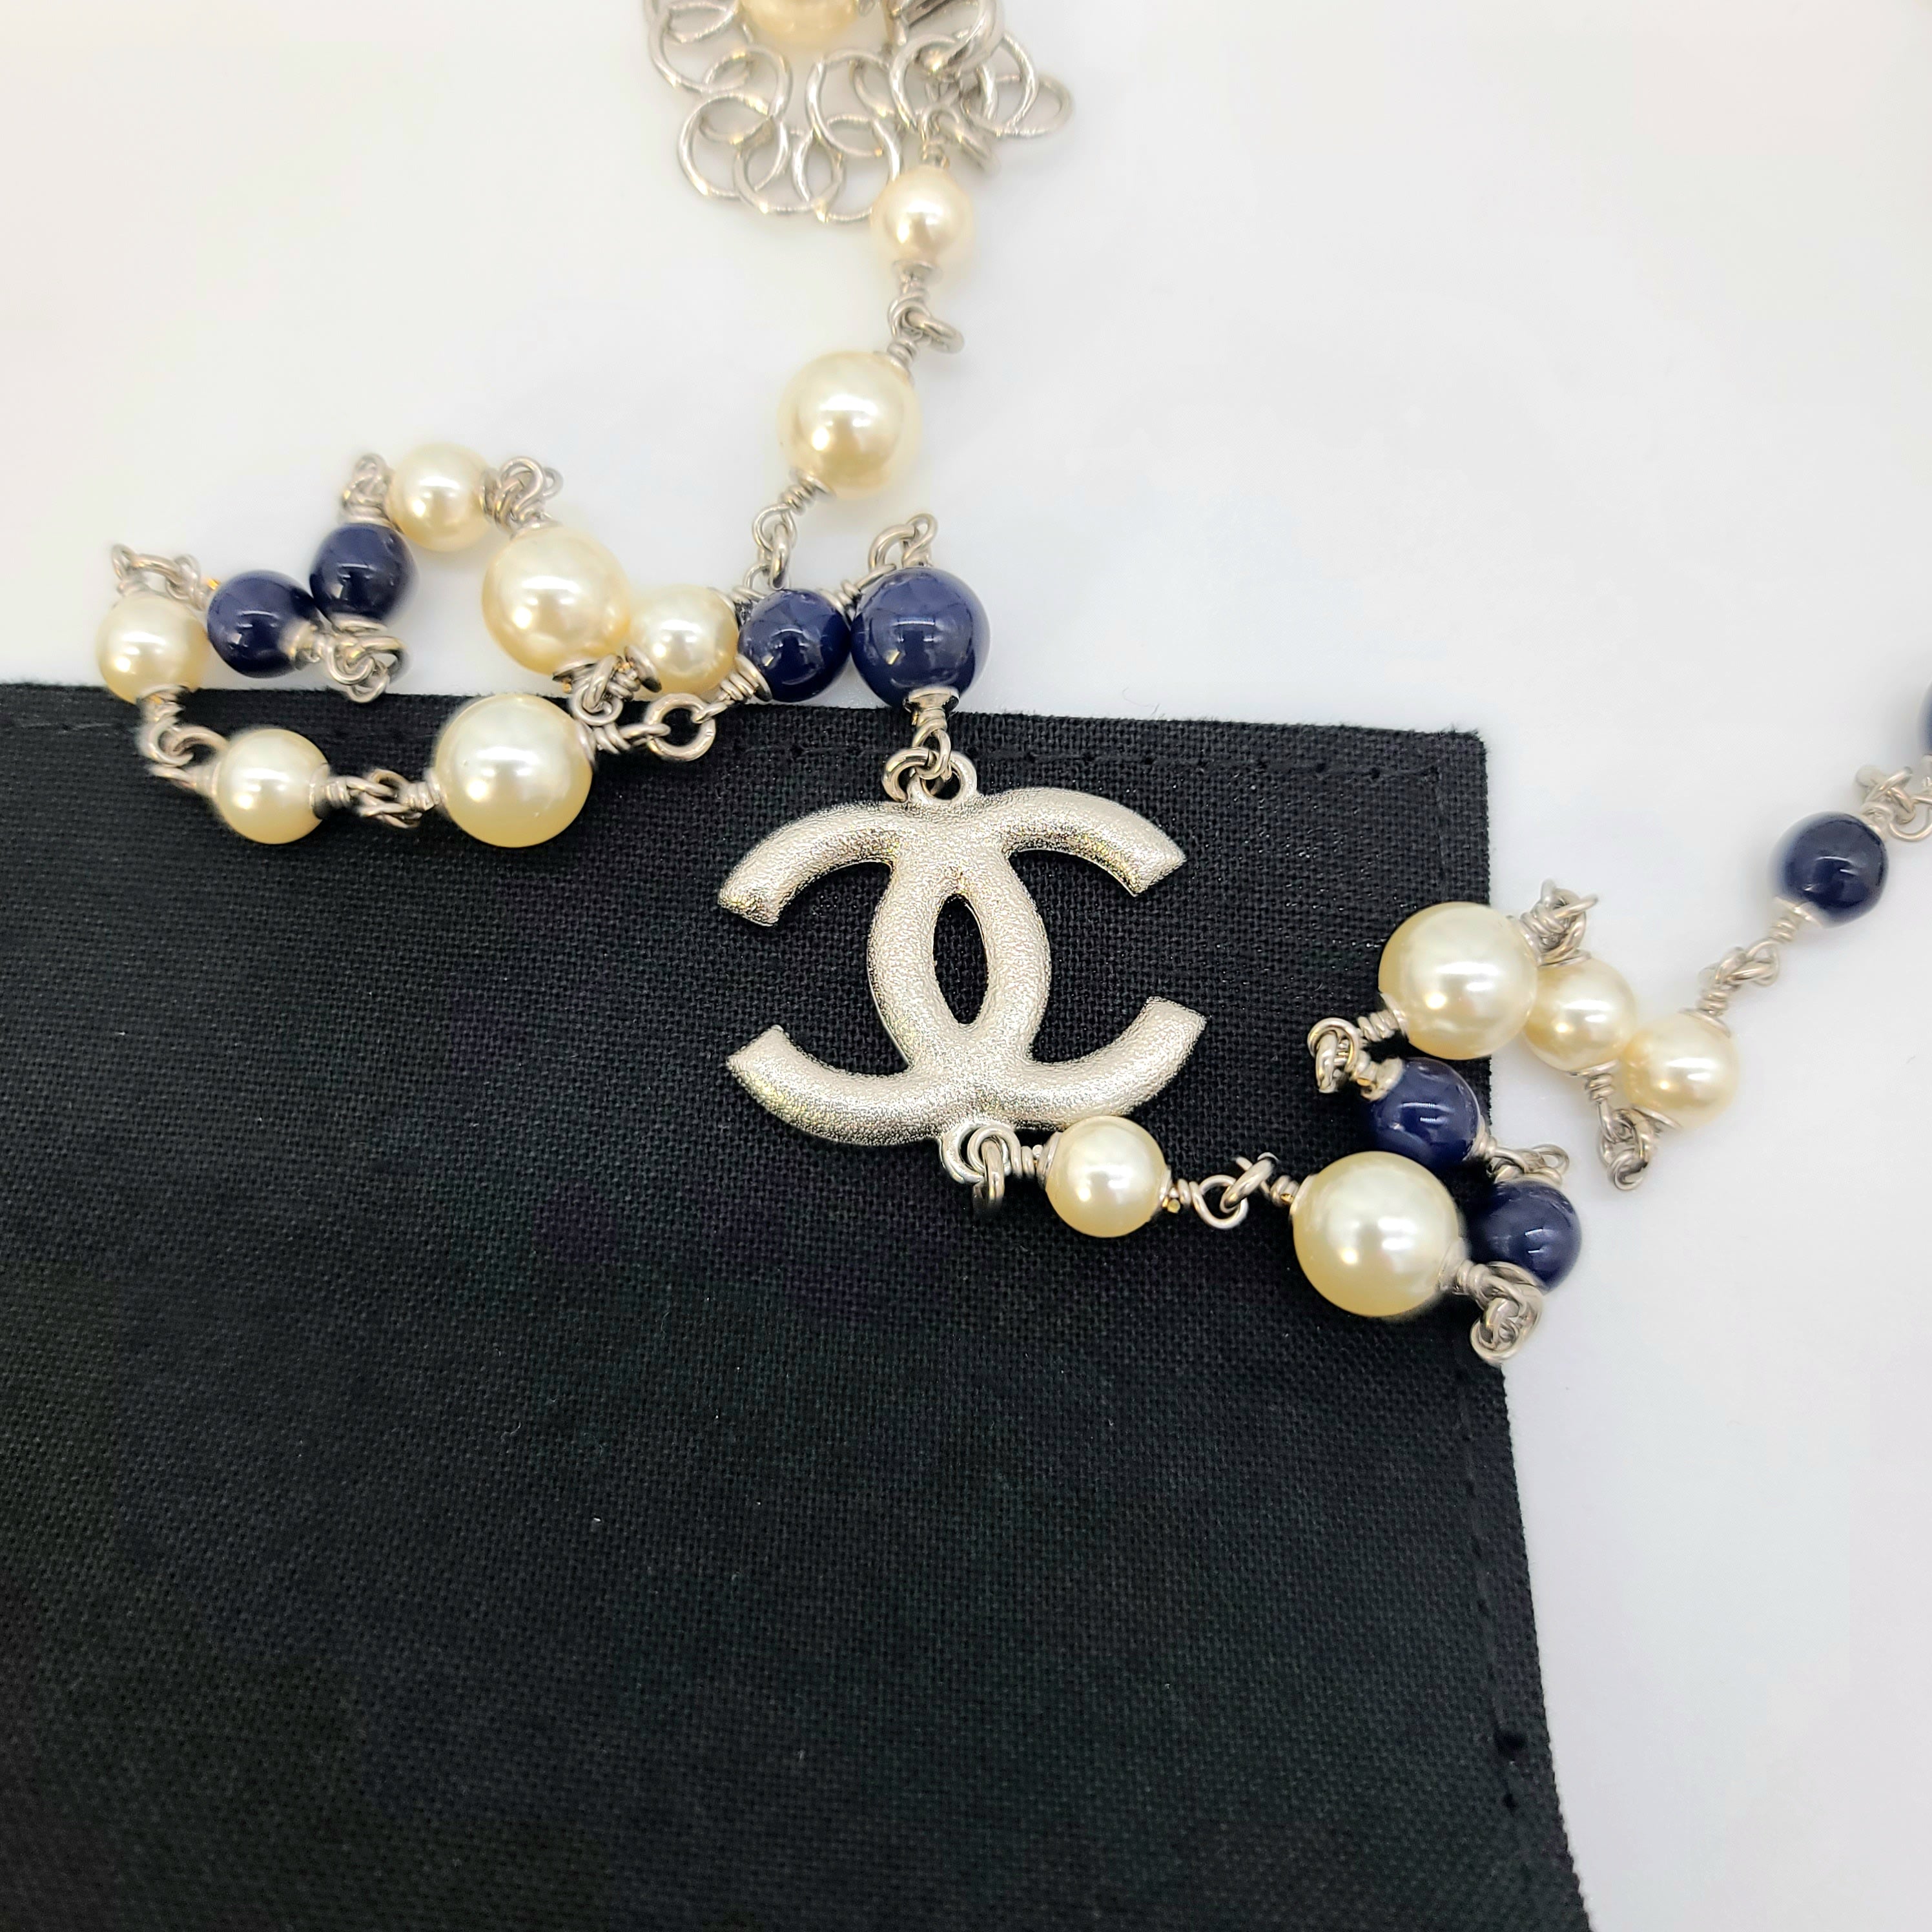 Chanel necklace / sautoir with pearls